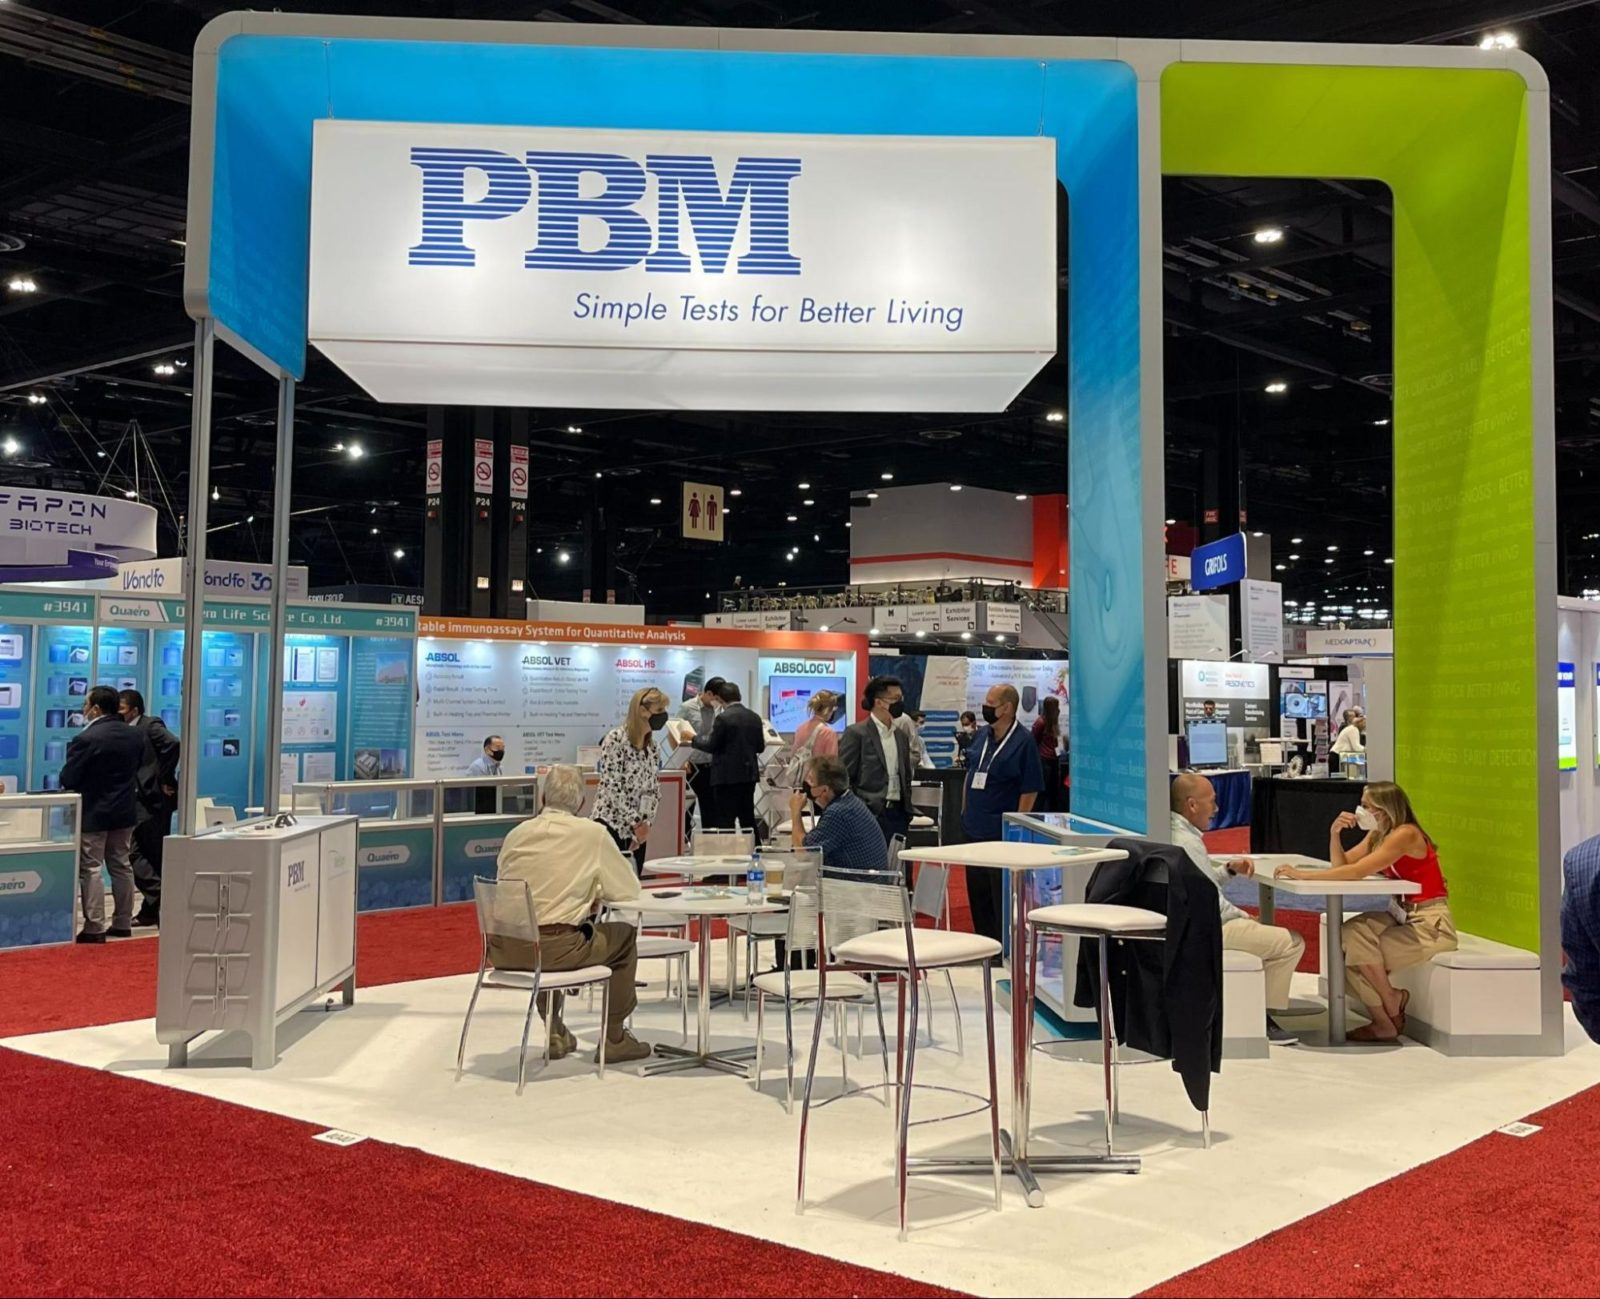 PBM's canopy in their trade show exhibit